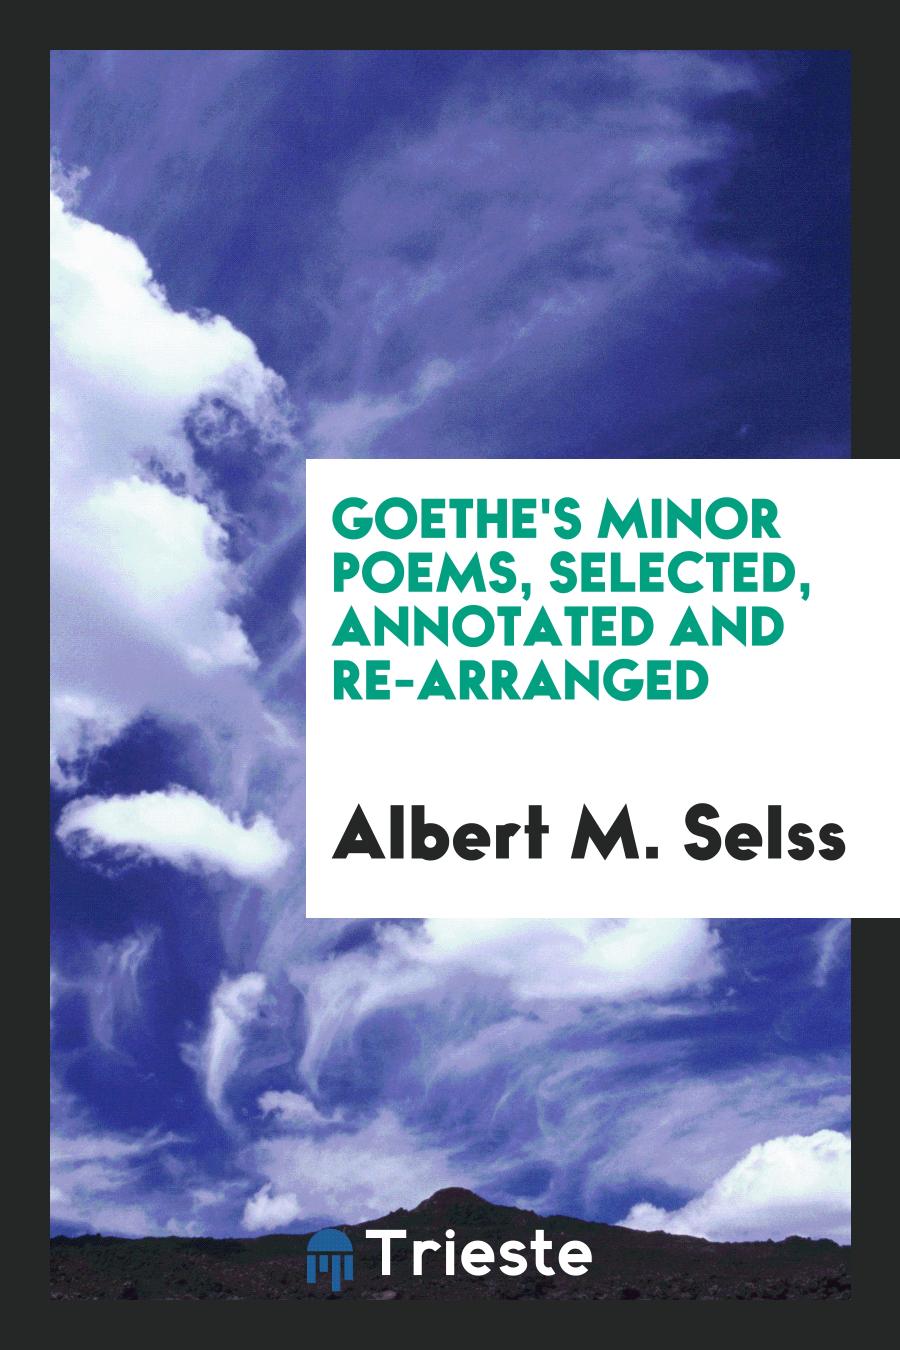 Goethe's Minor Poems, Selected, Annotated and Re-Arranged